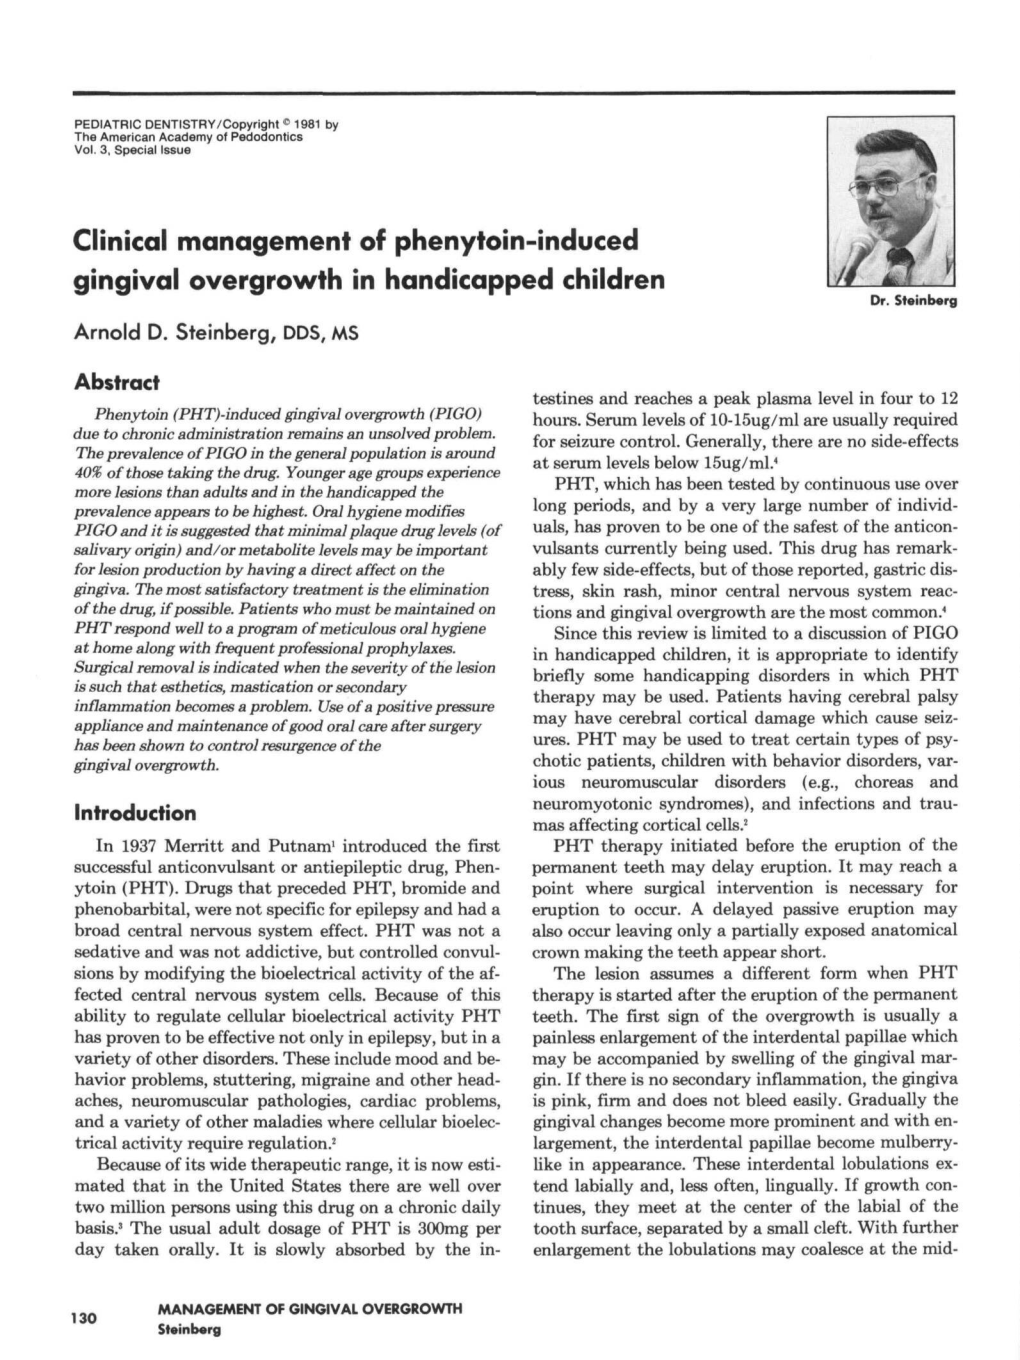 Clinical Management of Phenytoin-Induced Gingival Overgrowth in Handicapped Children Dr